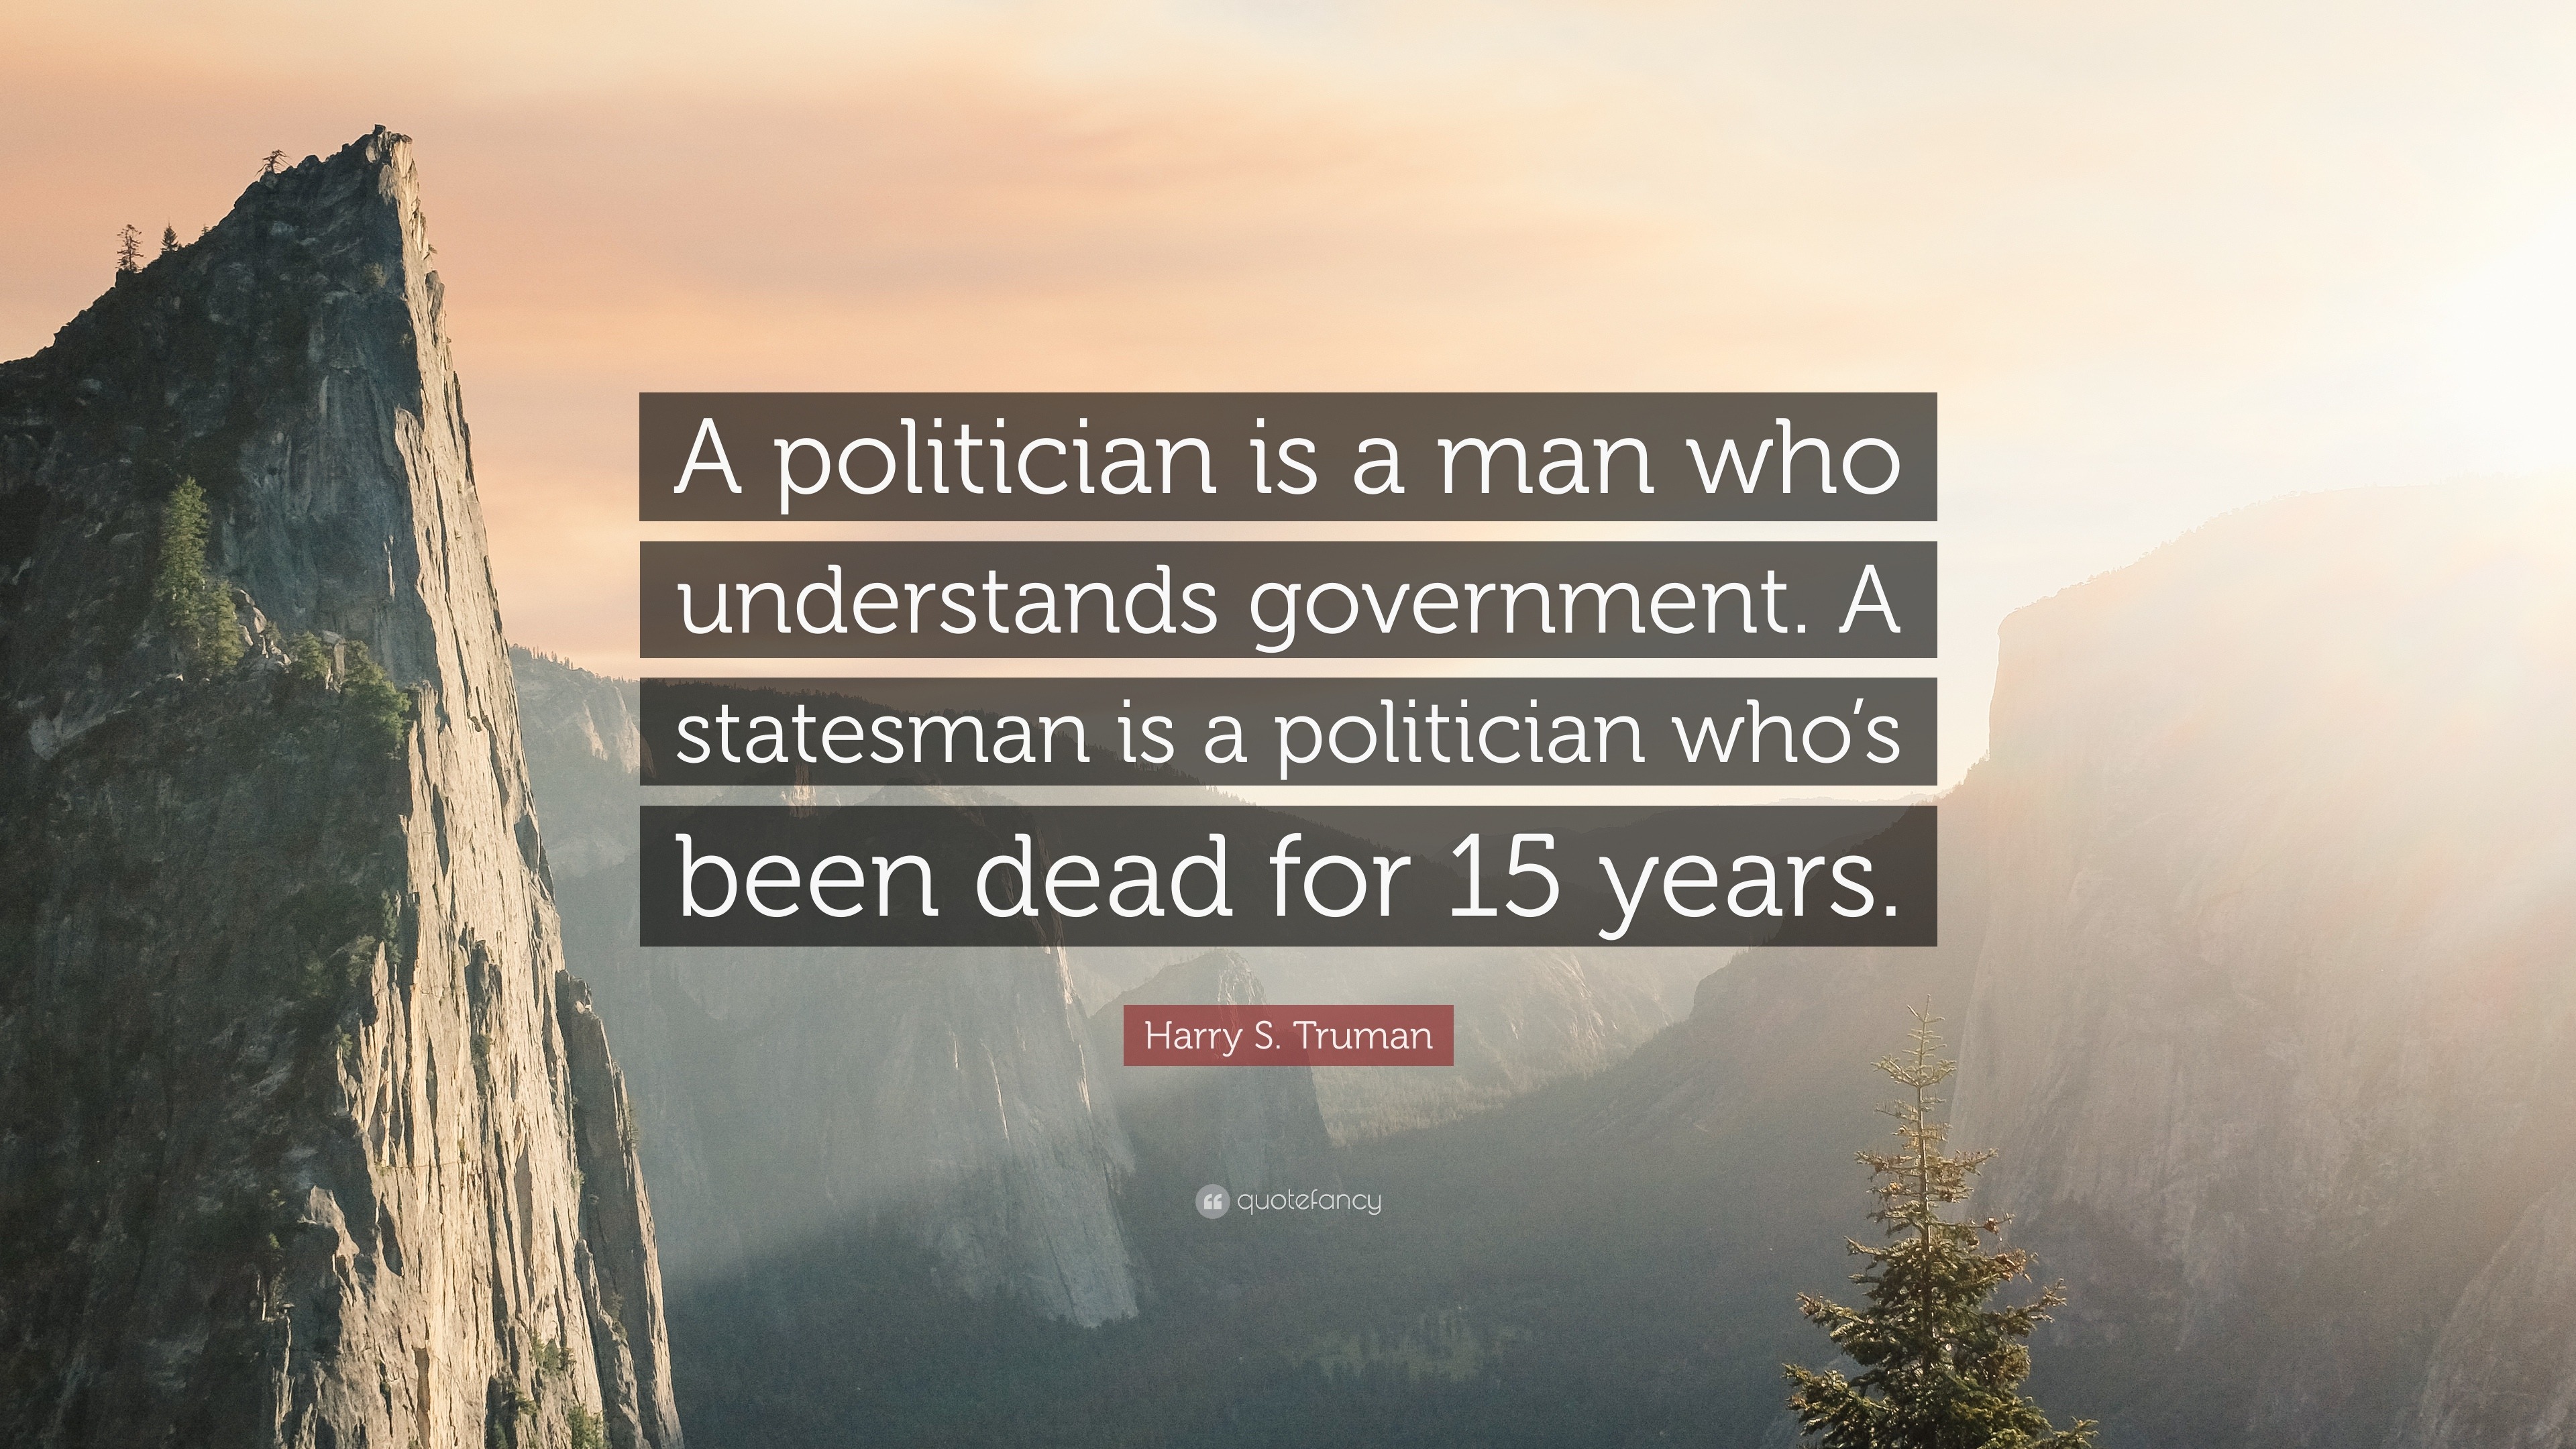 Harry S Truman Quote A Politician Is A Man Who Understands Images, Photos, Reviews